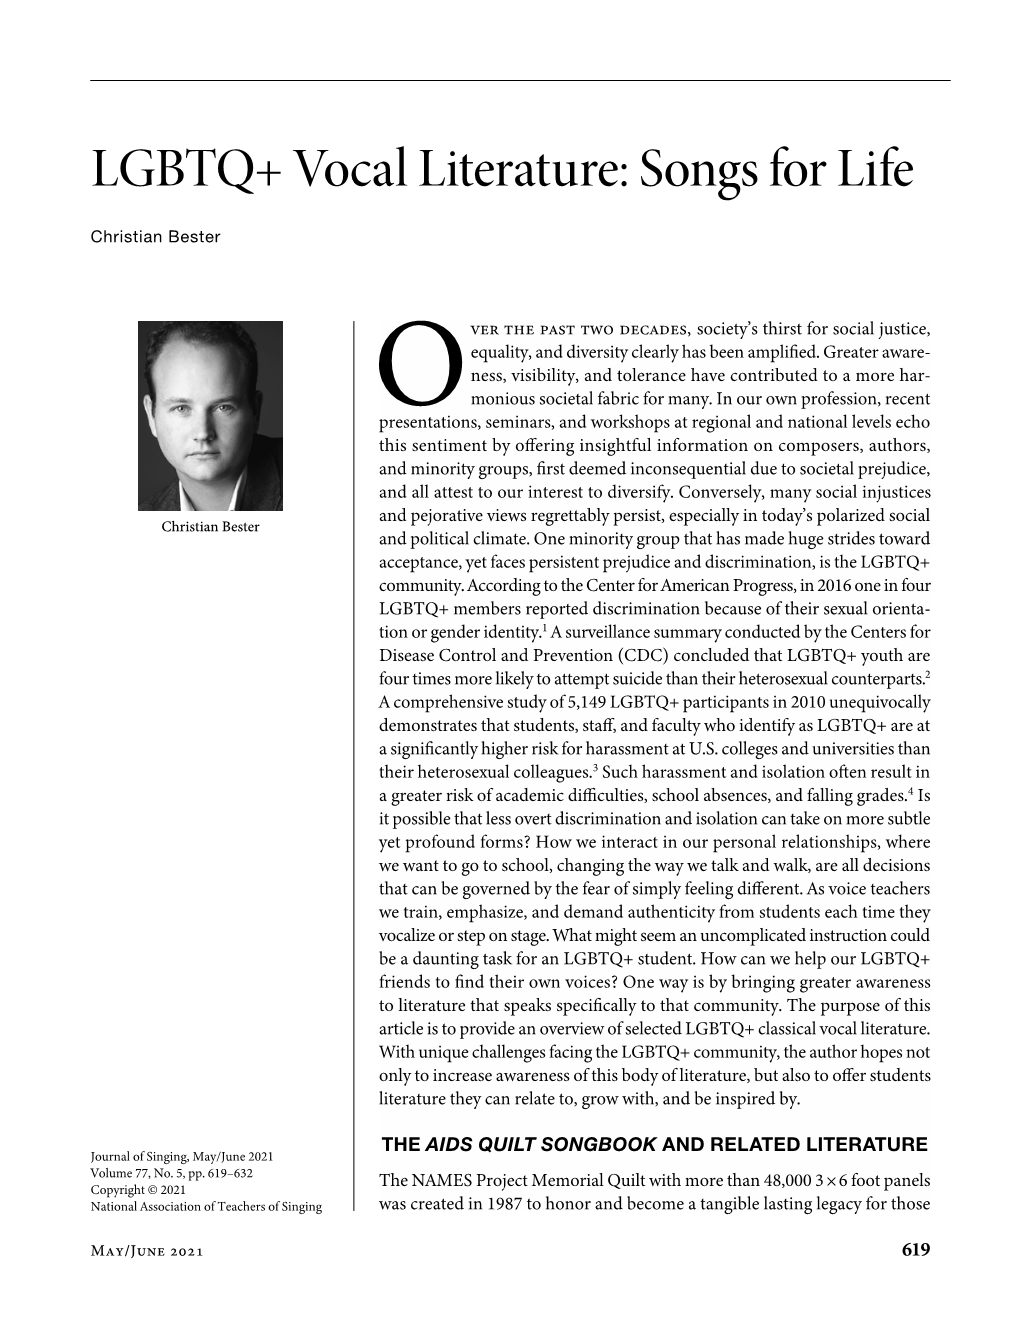 LGBTQ+ Vocal Literature: Songs for Life